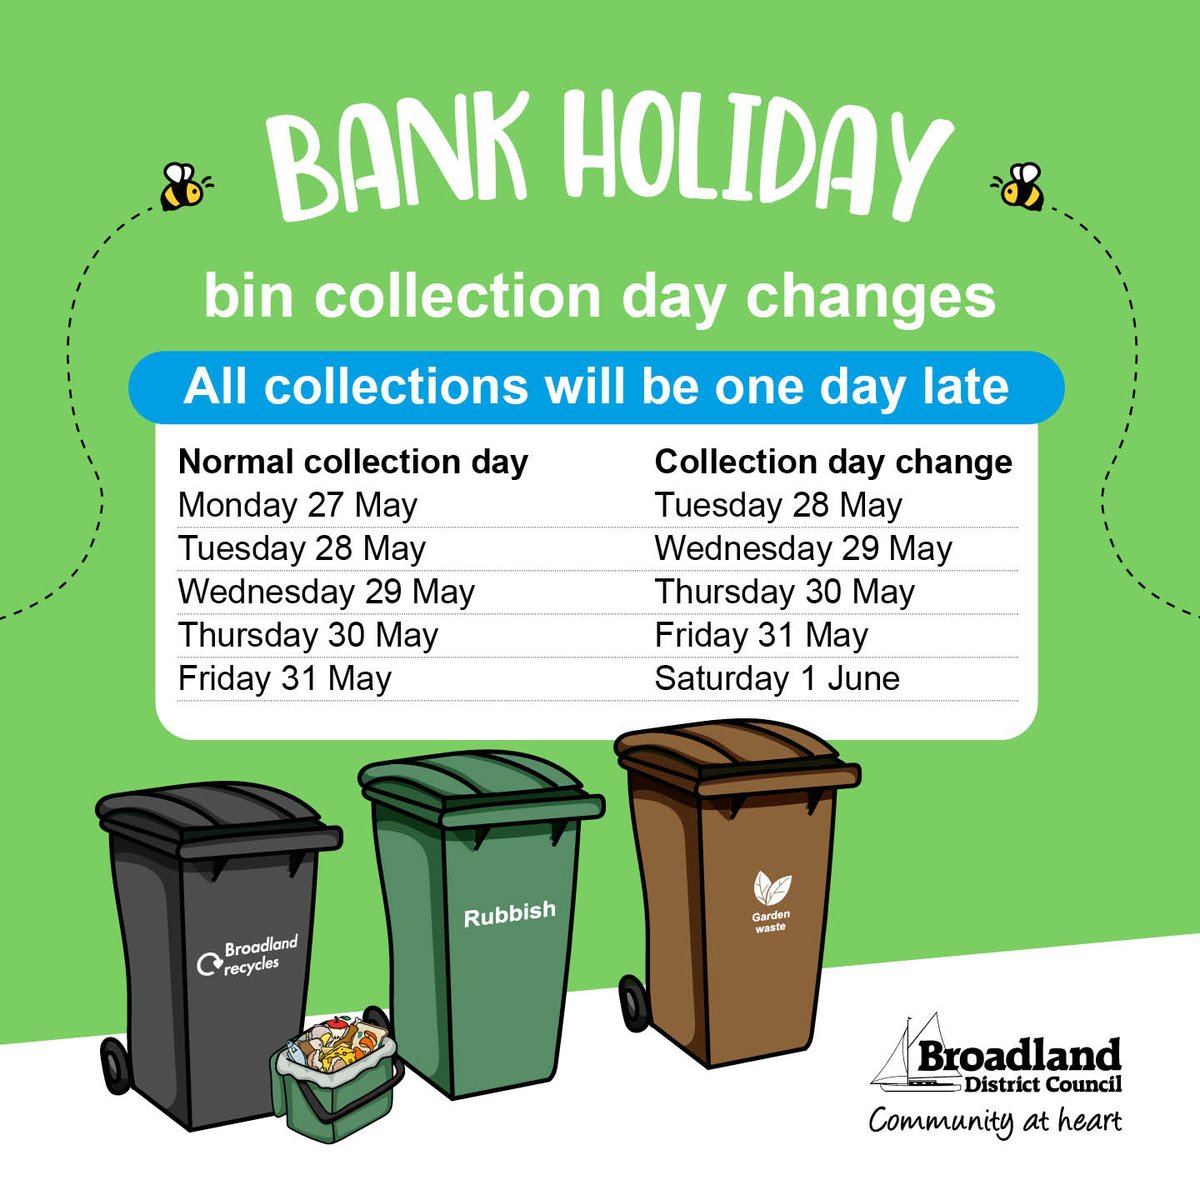 Rubbish, recycling, food waste and garden waste collections will be one day late next week due to the bank holiday. Please check the schedule for your collection day changes 👇 Keep up to date with your collections by downloading the Bin Collections app: ow.ly/6zyR50Rshmk